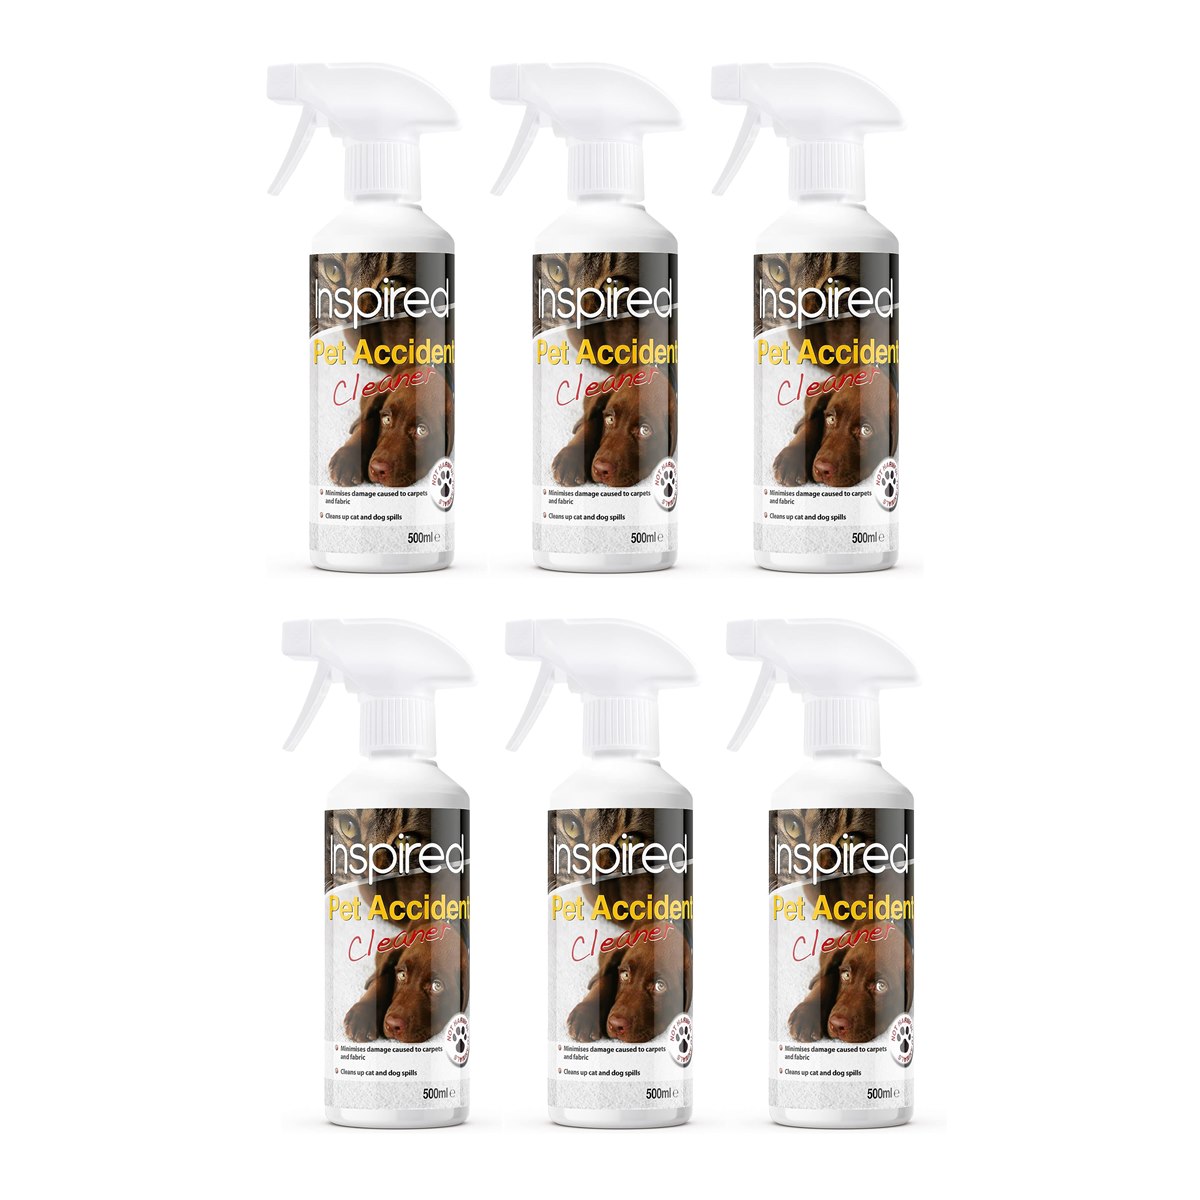 Case of 6 x Inspired Pet Accident Cleaner Spray 500ml